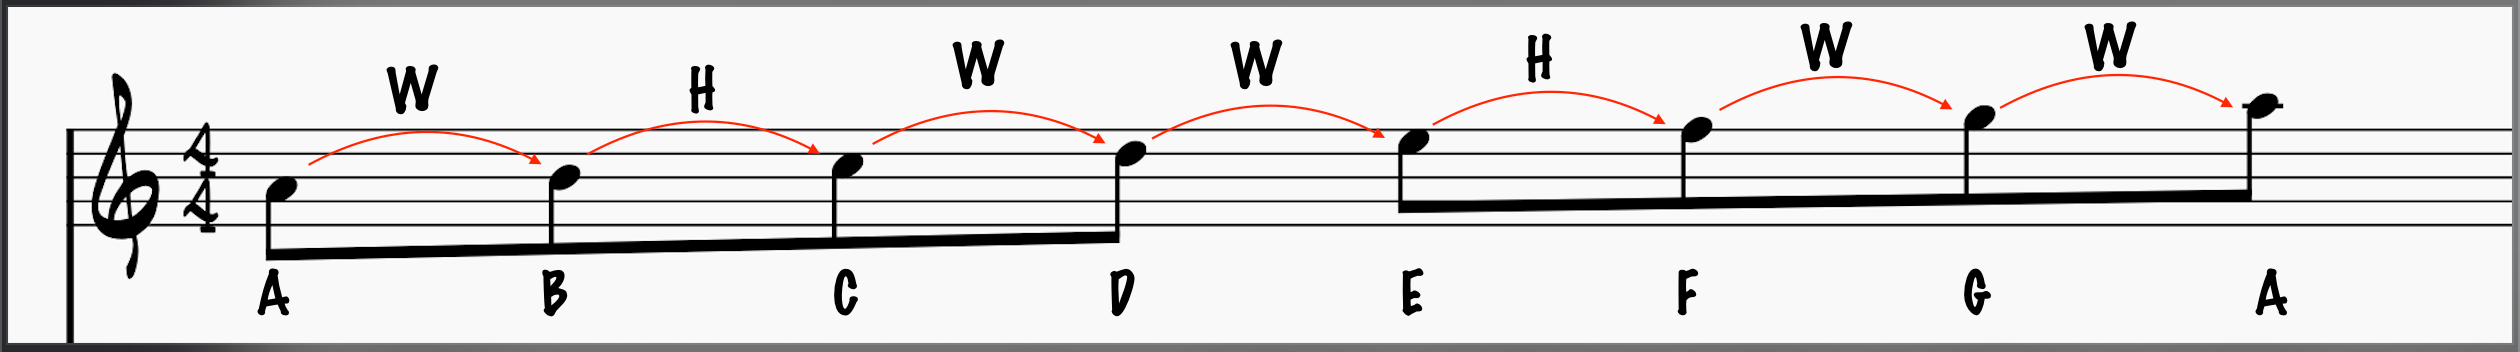 Minor scale spelled from A with steps listed